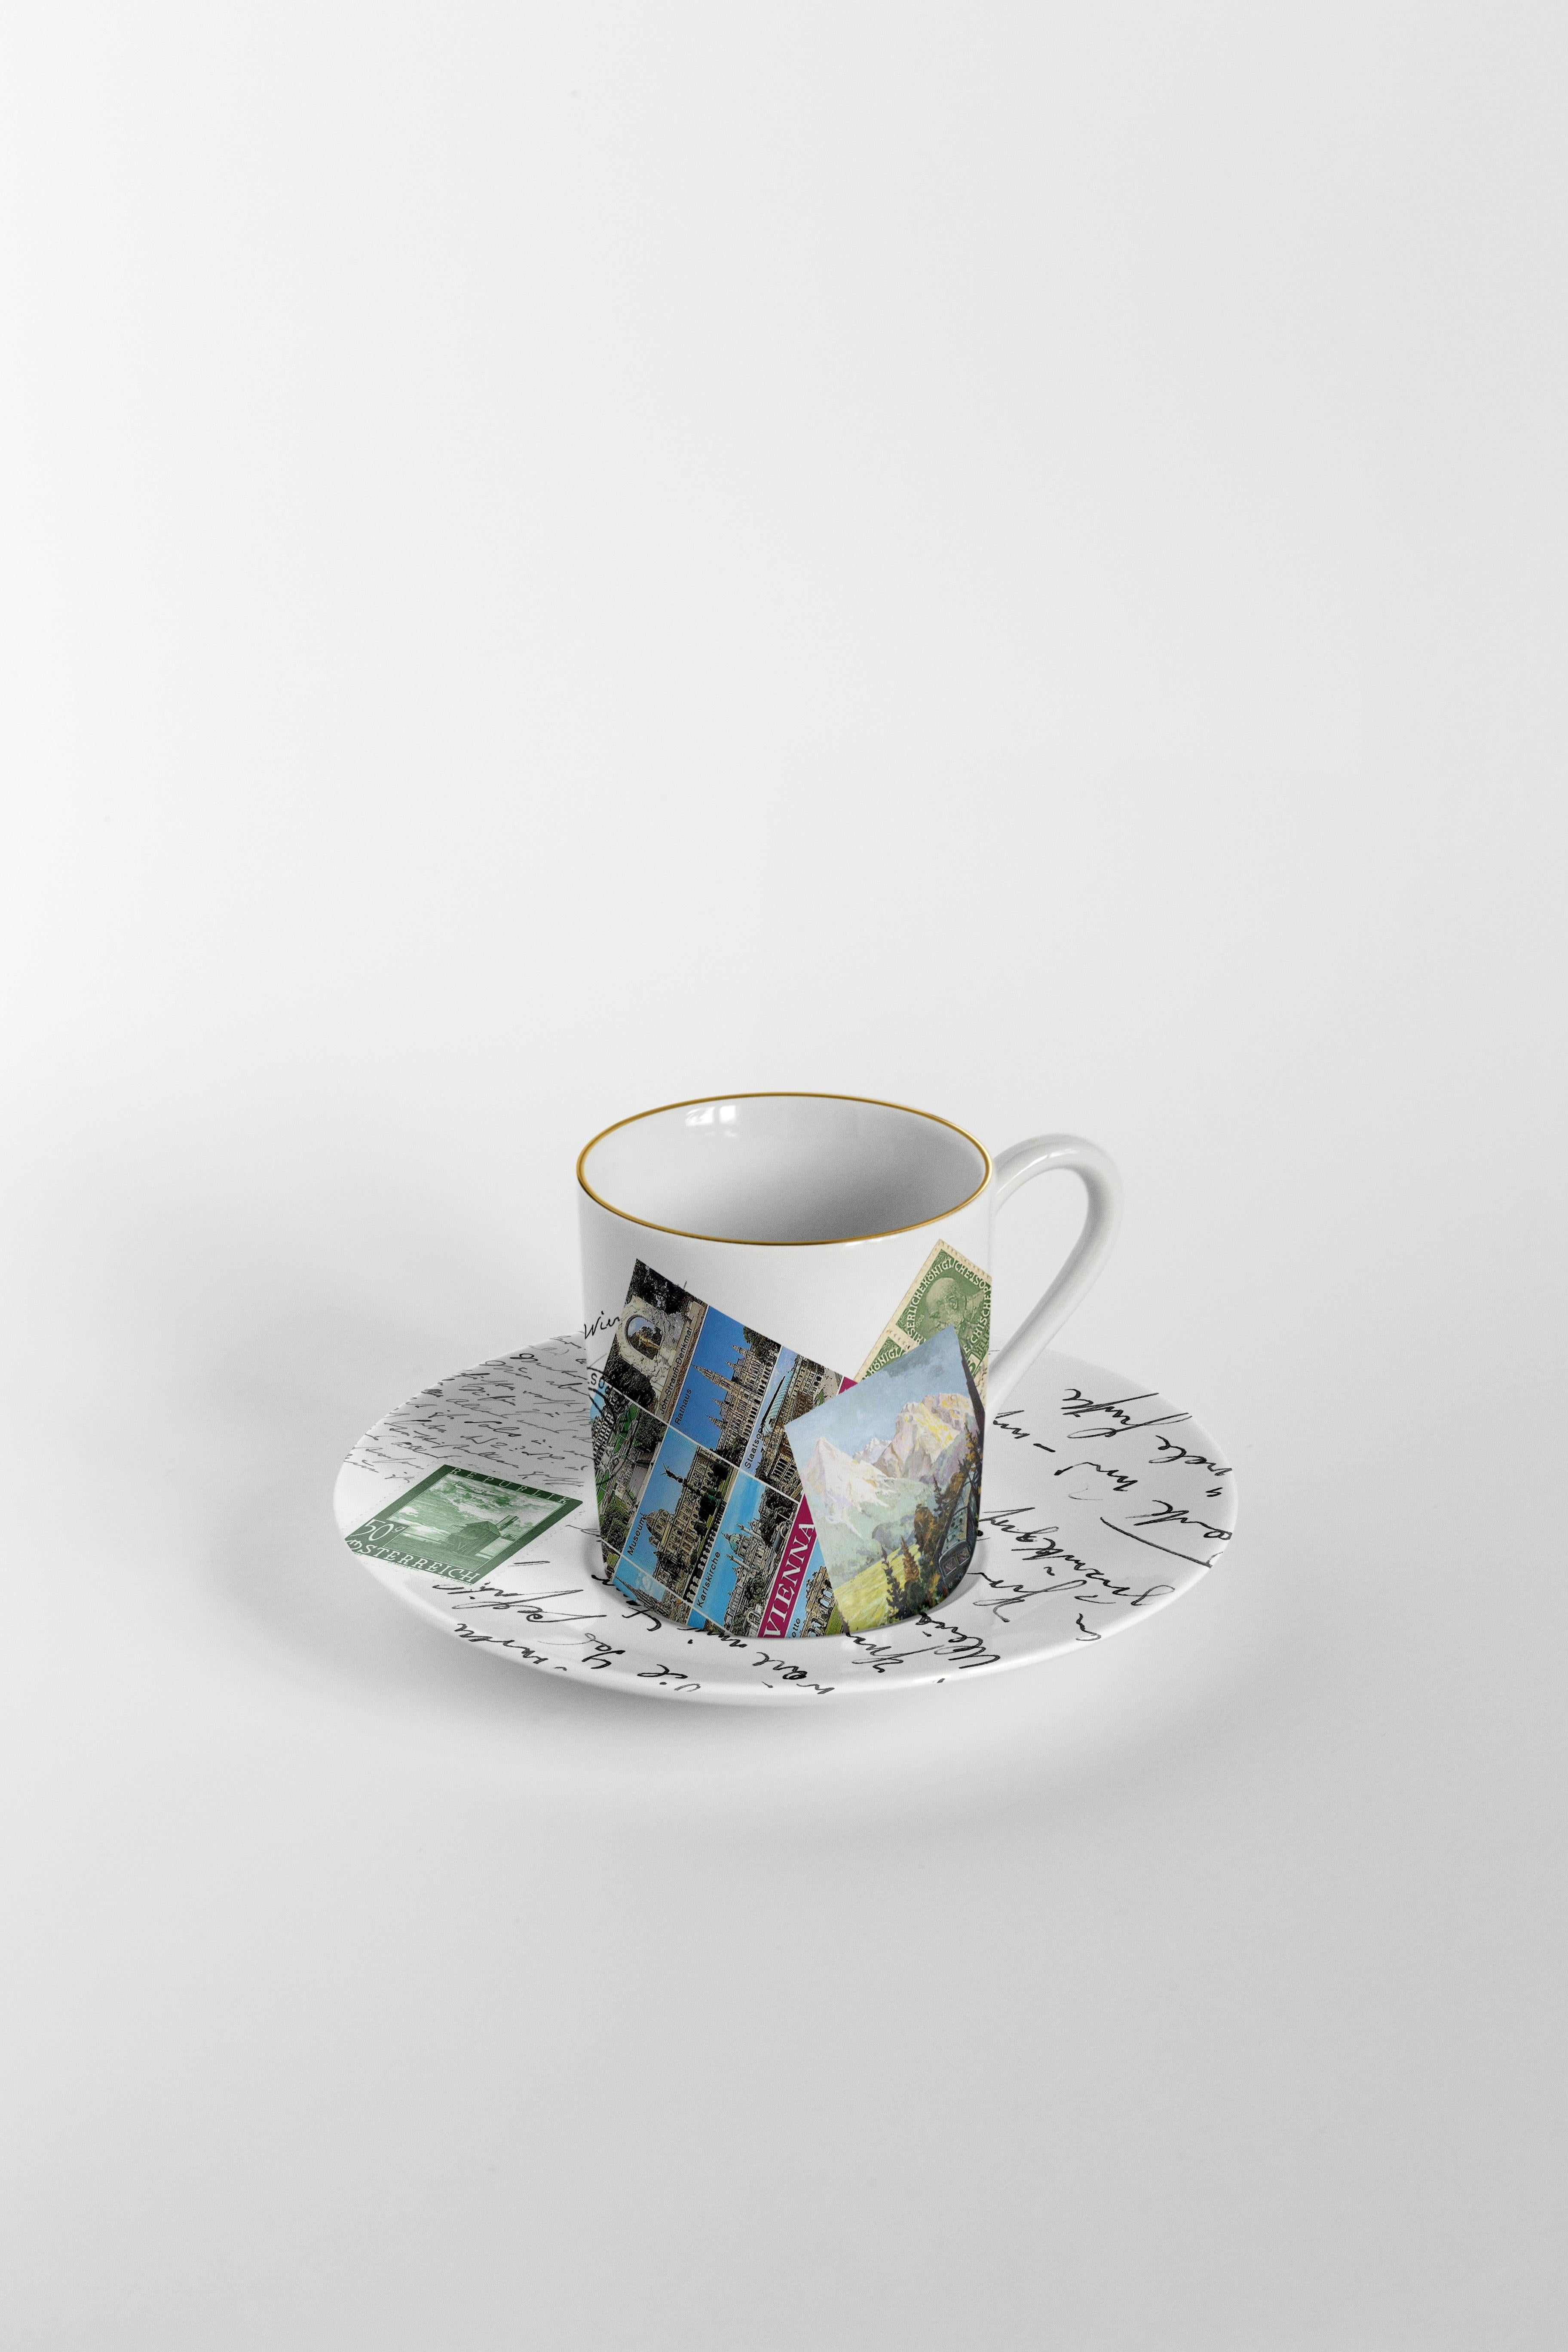 Corrispondenze, Six Contemporary Decorated Coffee Cups with Plates For Sale 2